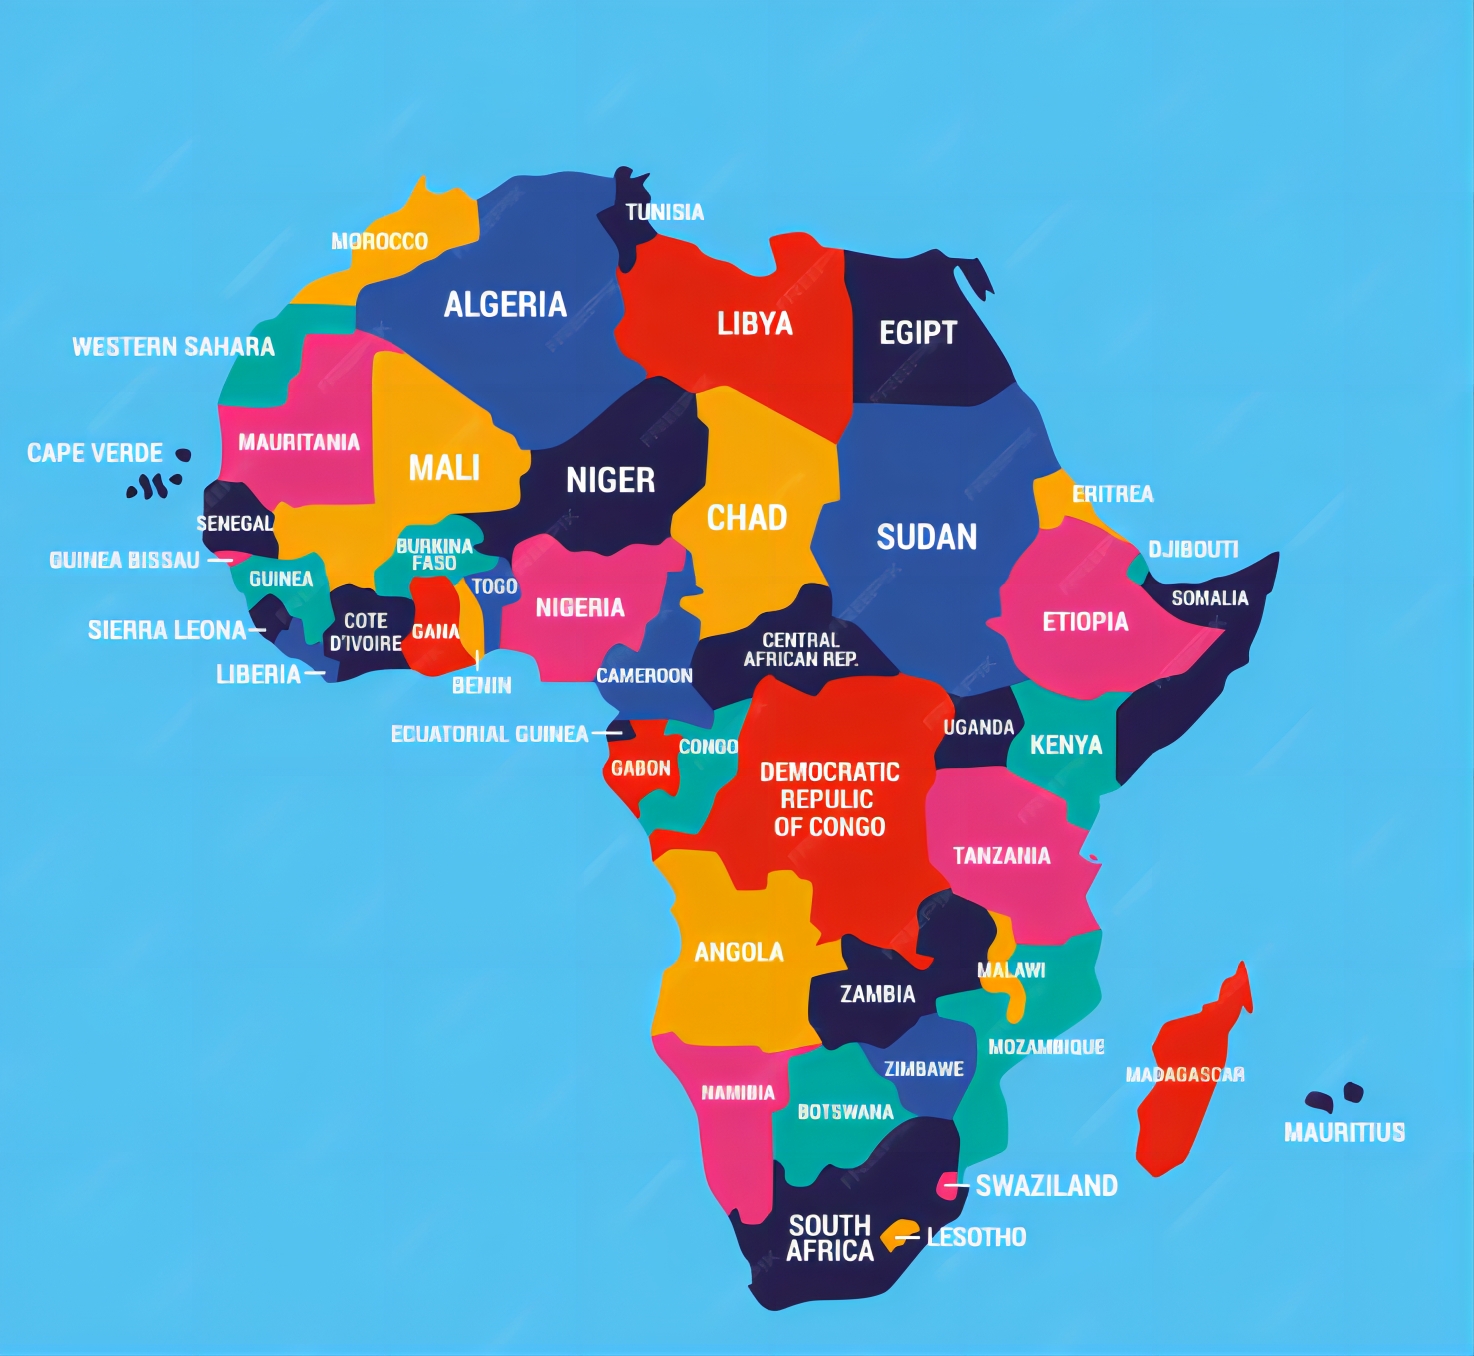 Exporting to Africa requires a COC certificate for customs clearance